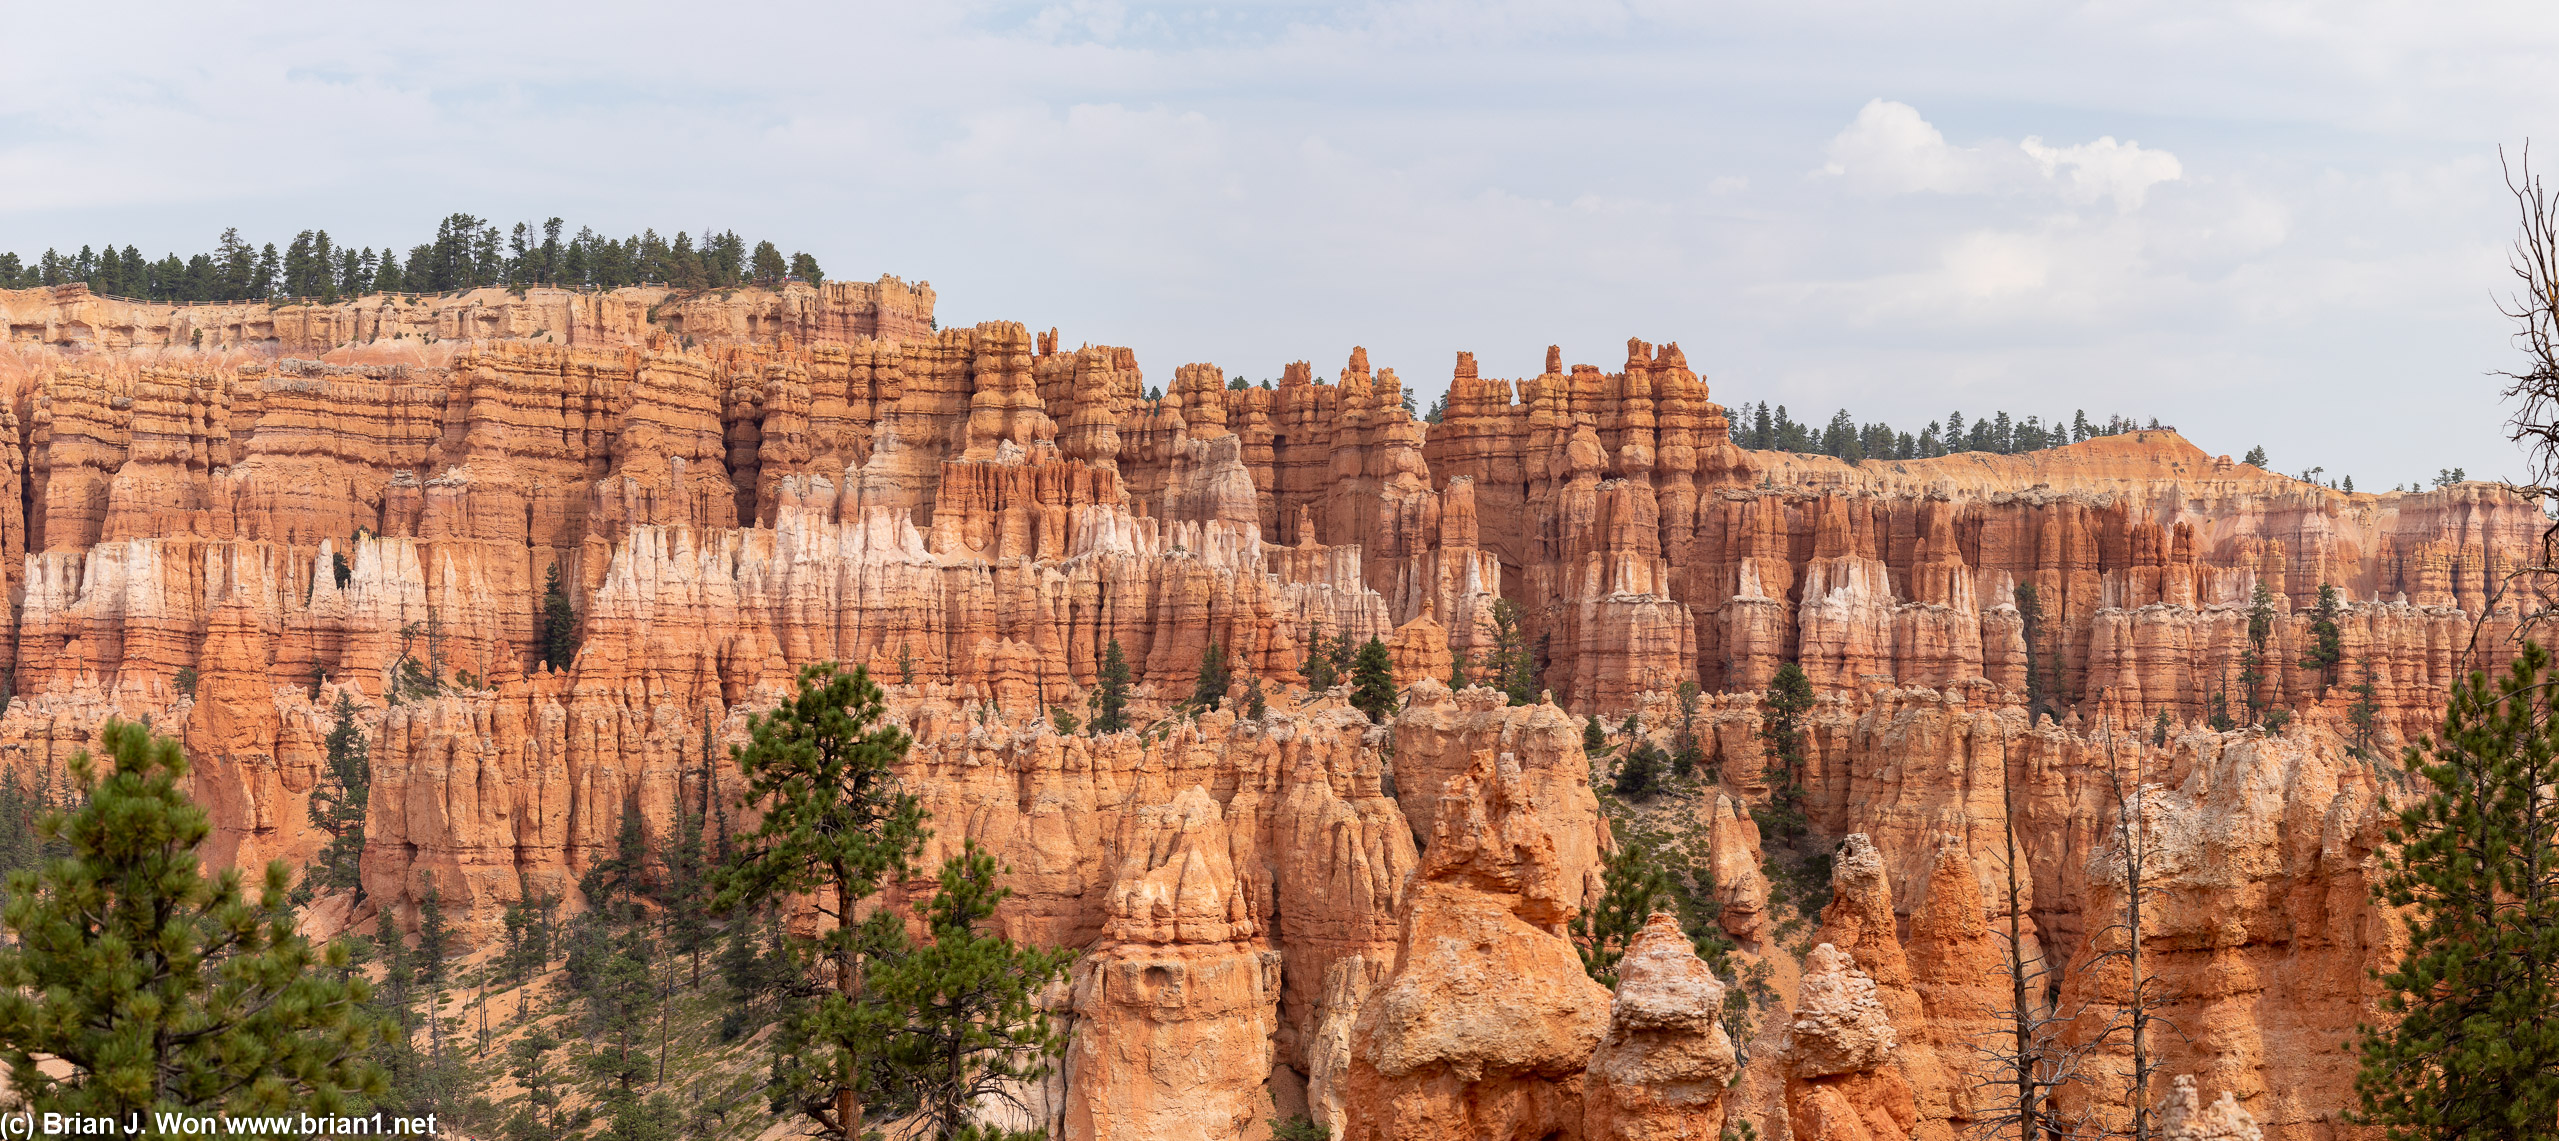 Literally. An entire wall of hoodoos.